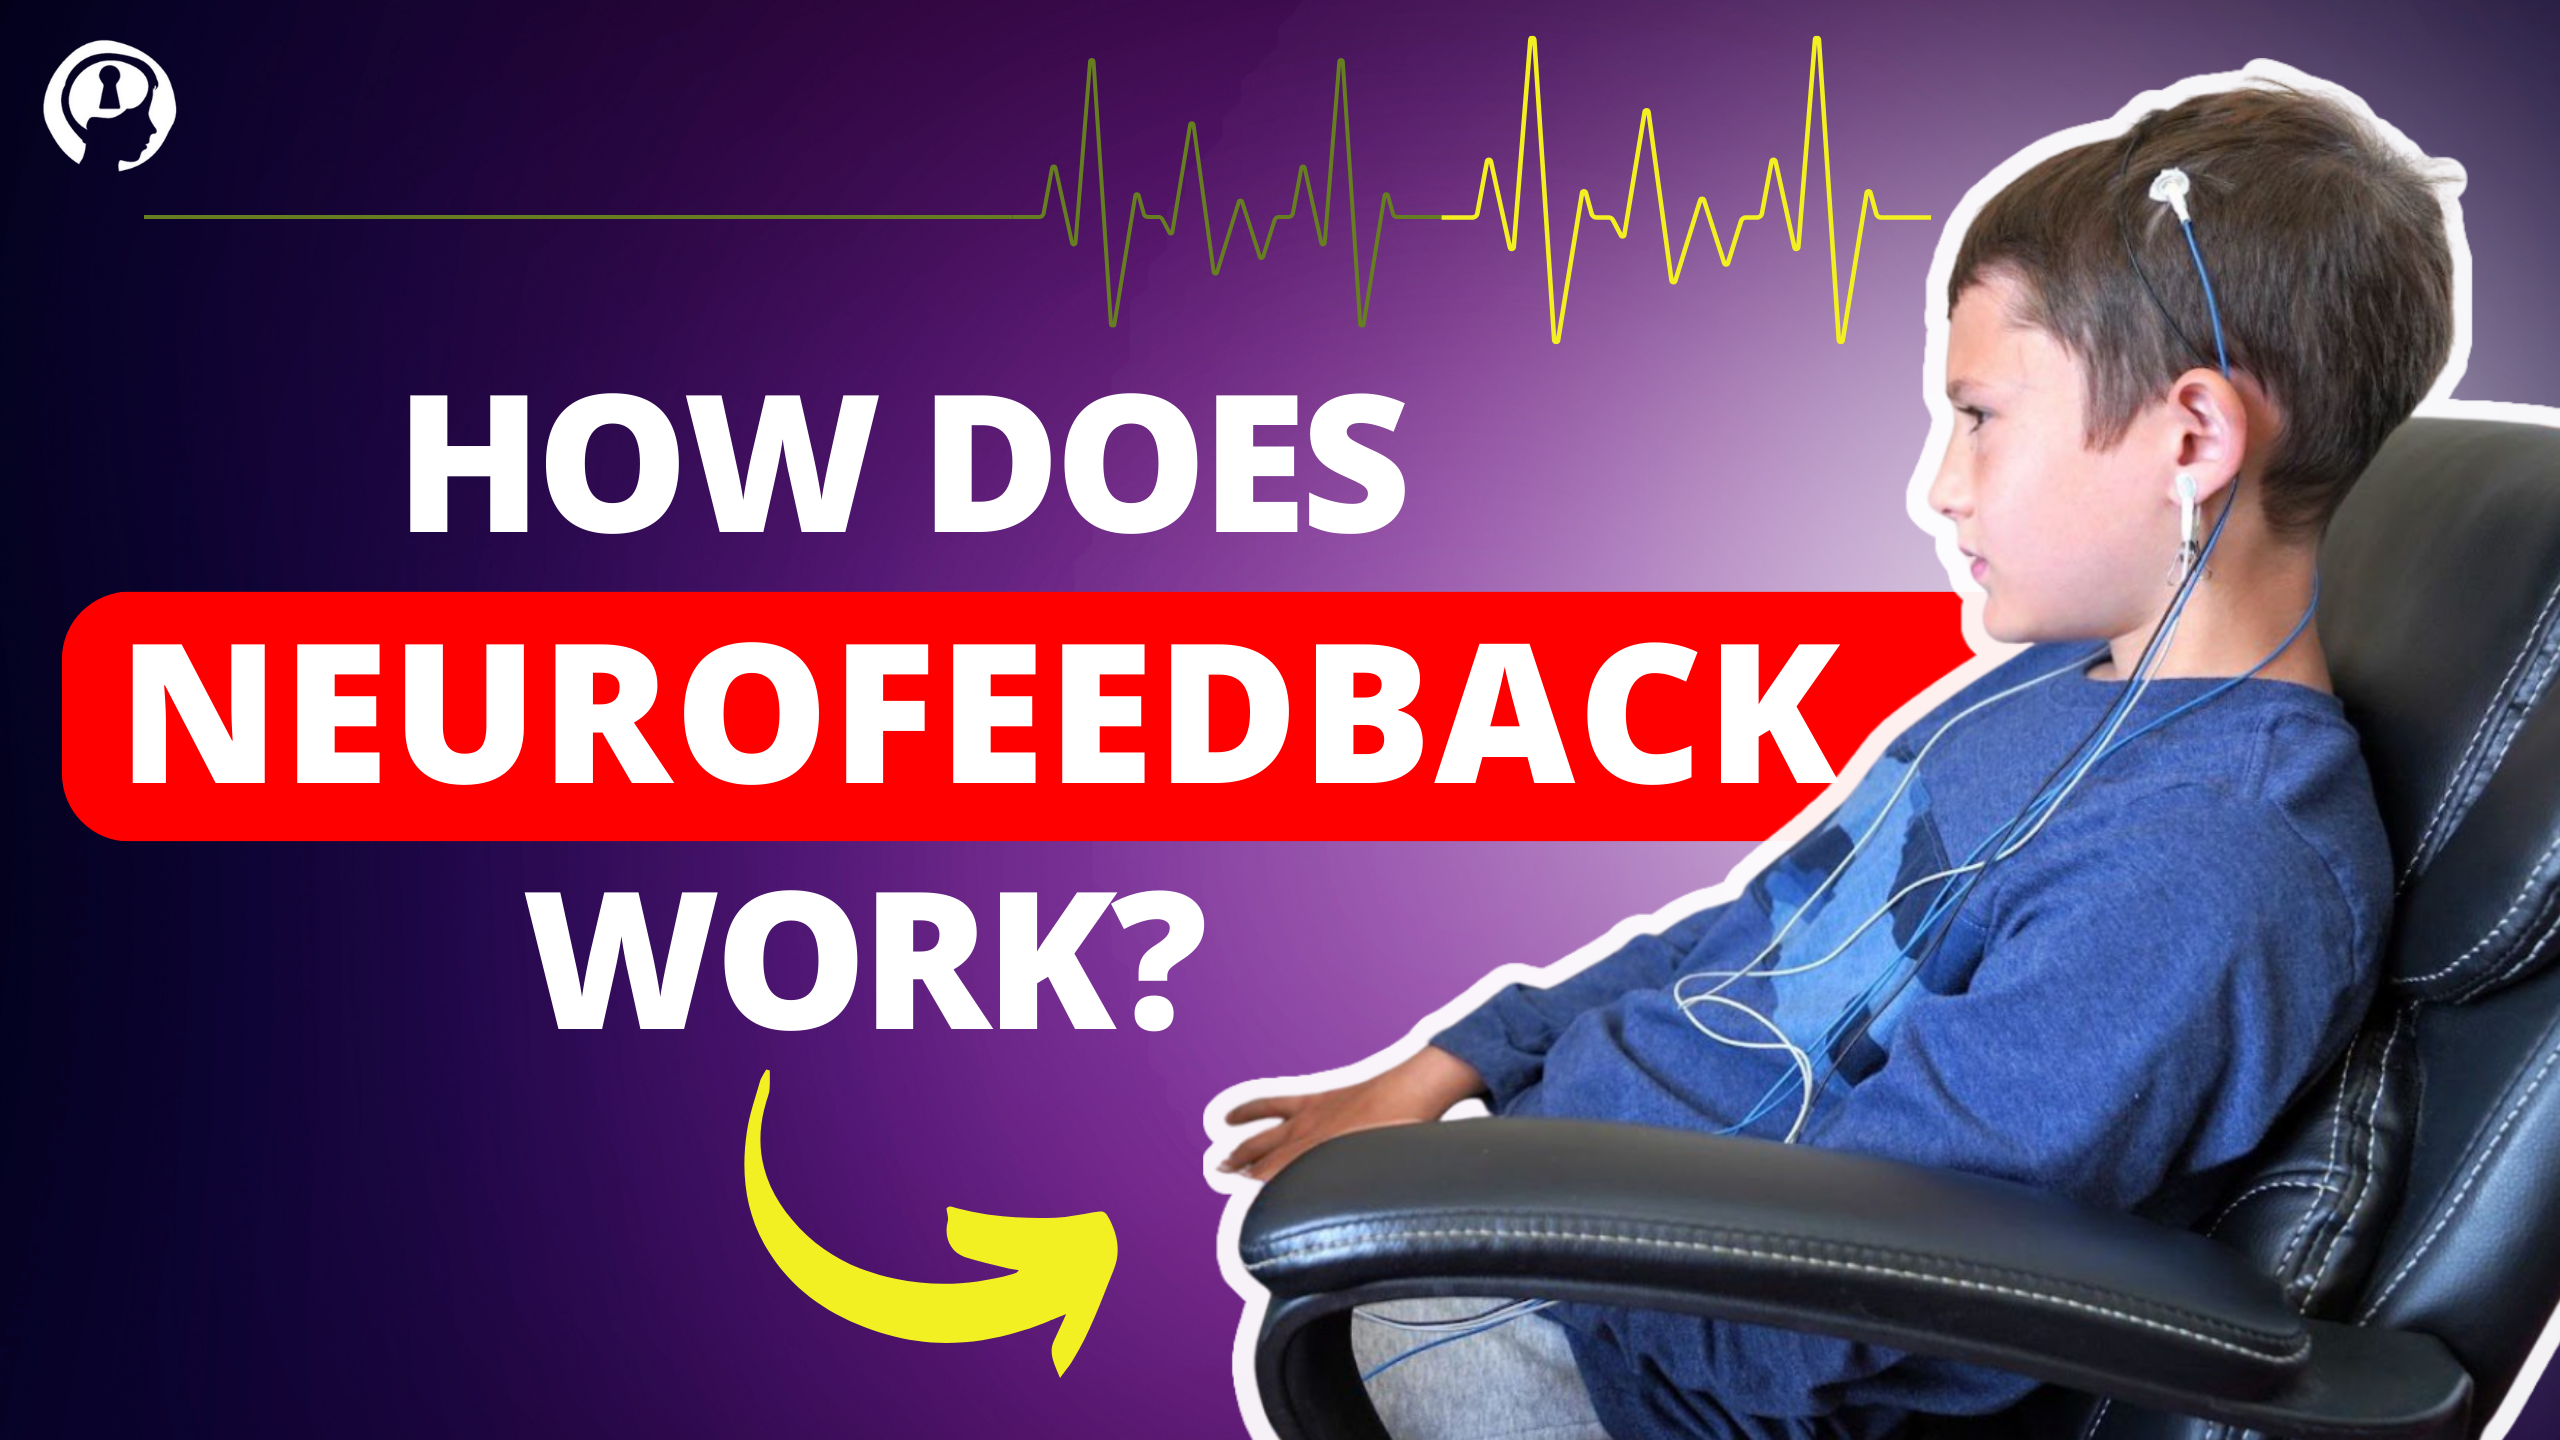 Ask Me Anything: How does neurofeedback work?